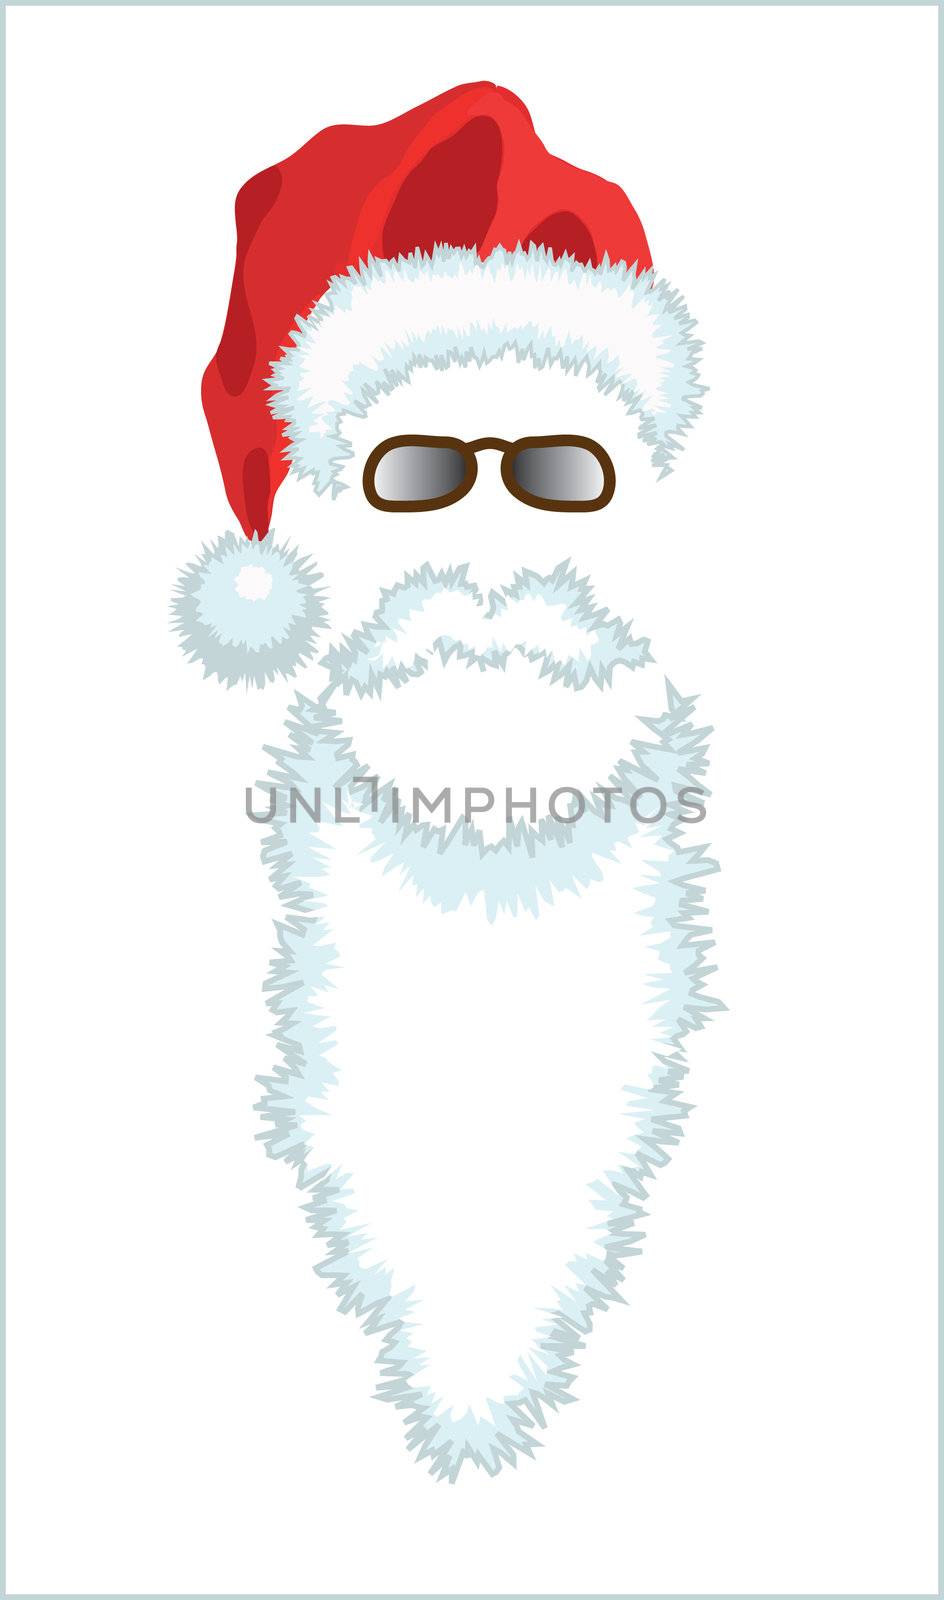 Red Santa Claus Hat, beard and glasses. Vector illustration isolated on green background.